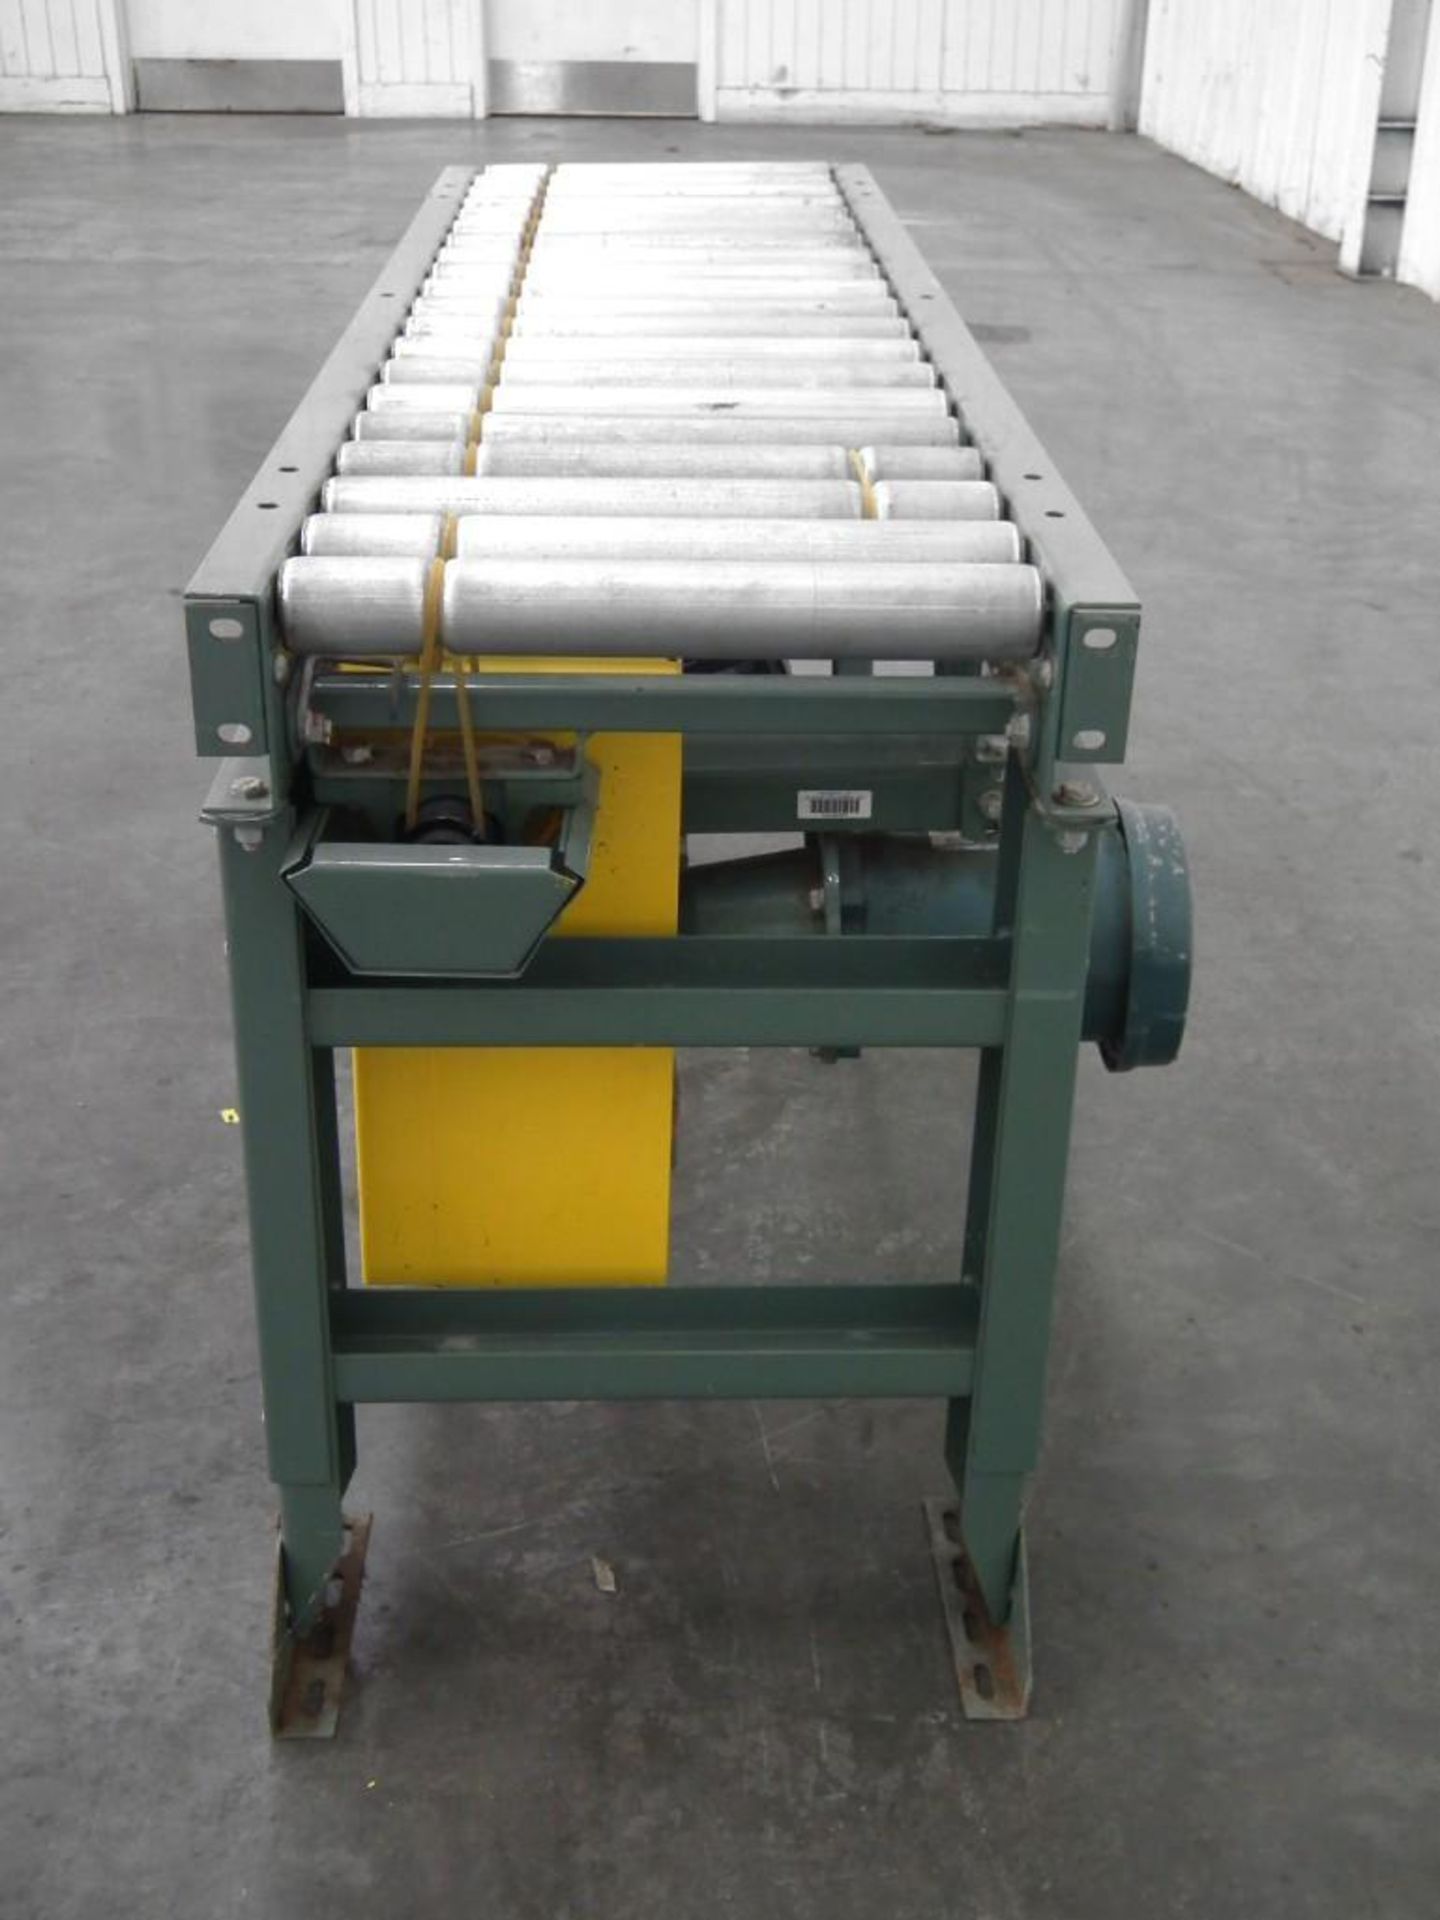 Hytrol 14 Inches Wide x 62 Inches Long Conveyor - Image 4 of 13